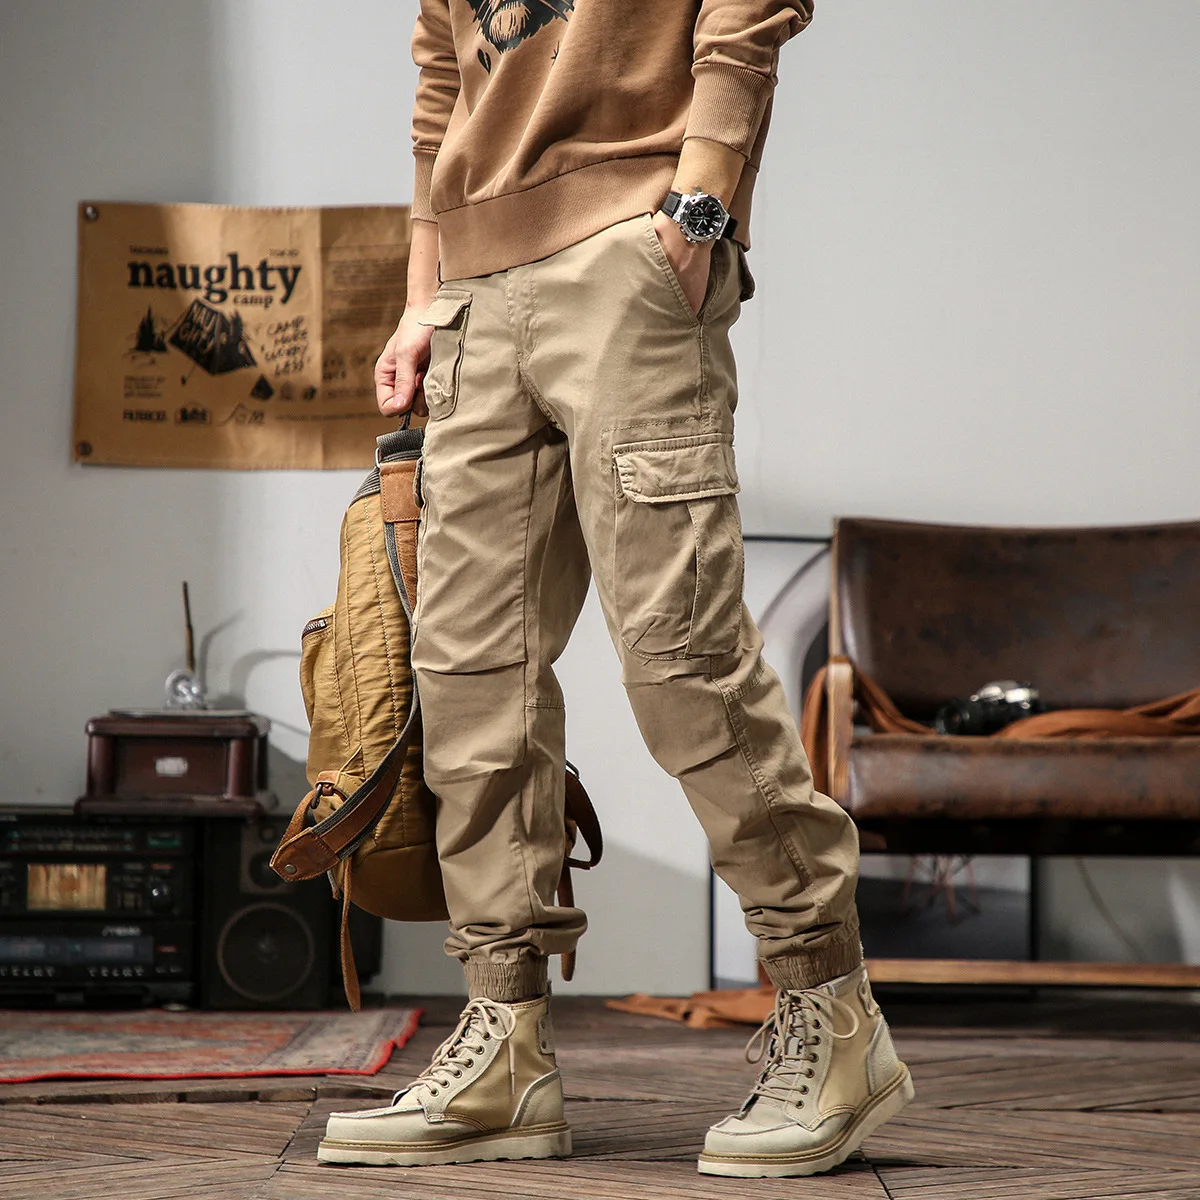 Elmsk Men's Spring and Autumn New Vintage Khaki Workwear Pants with Loose Feet and Large Pockets Trendy Heavyweight Casual Sport elmsk workwear pants for young men on the street harajuku trendy brand loose casual leggings with multiple pockets elastic lar